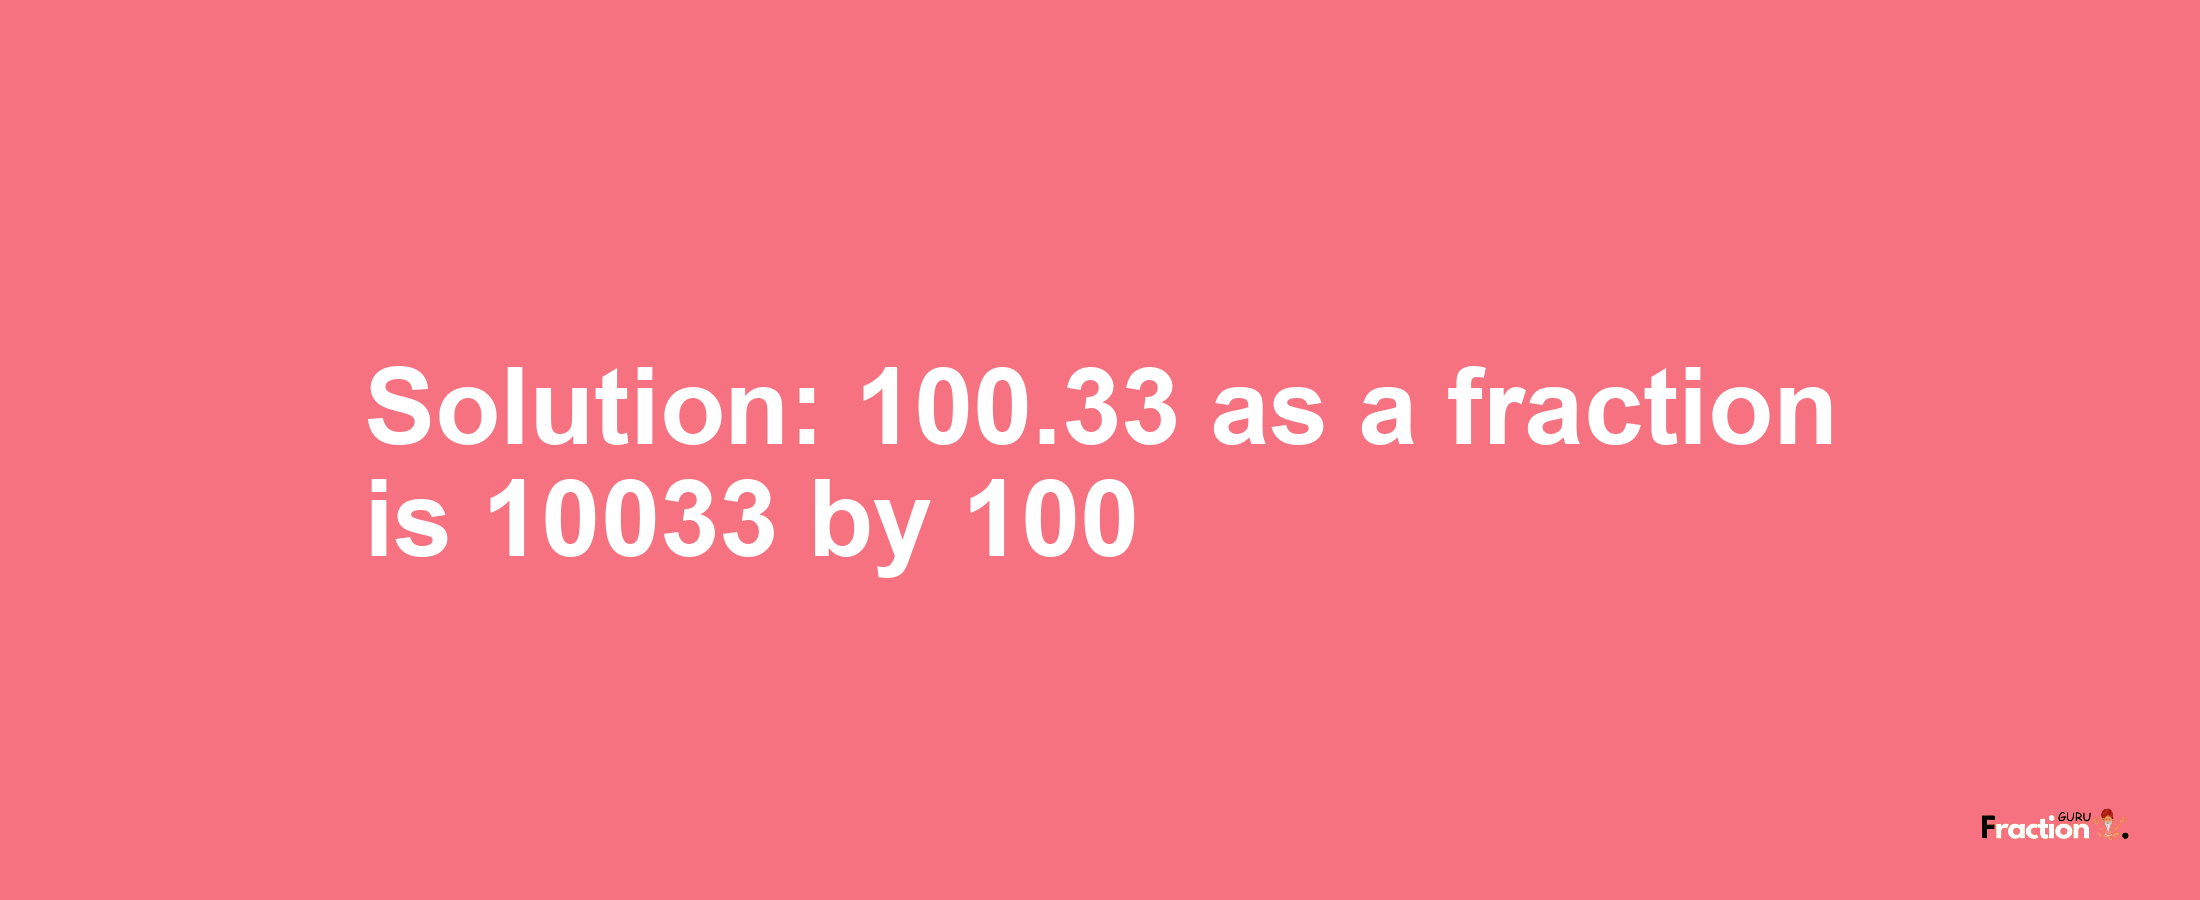 Solution:100.33 as a fraction is 10033/100